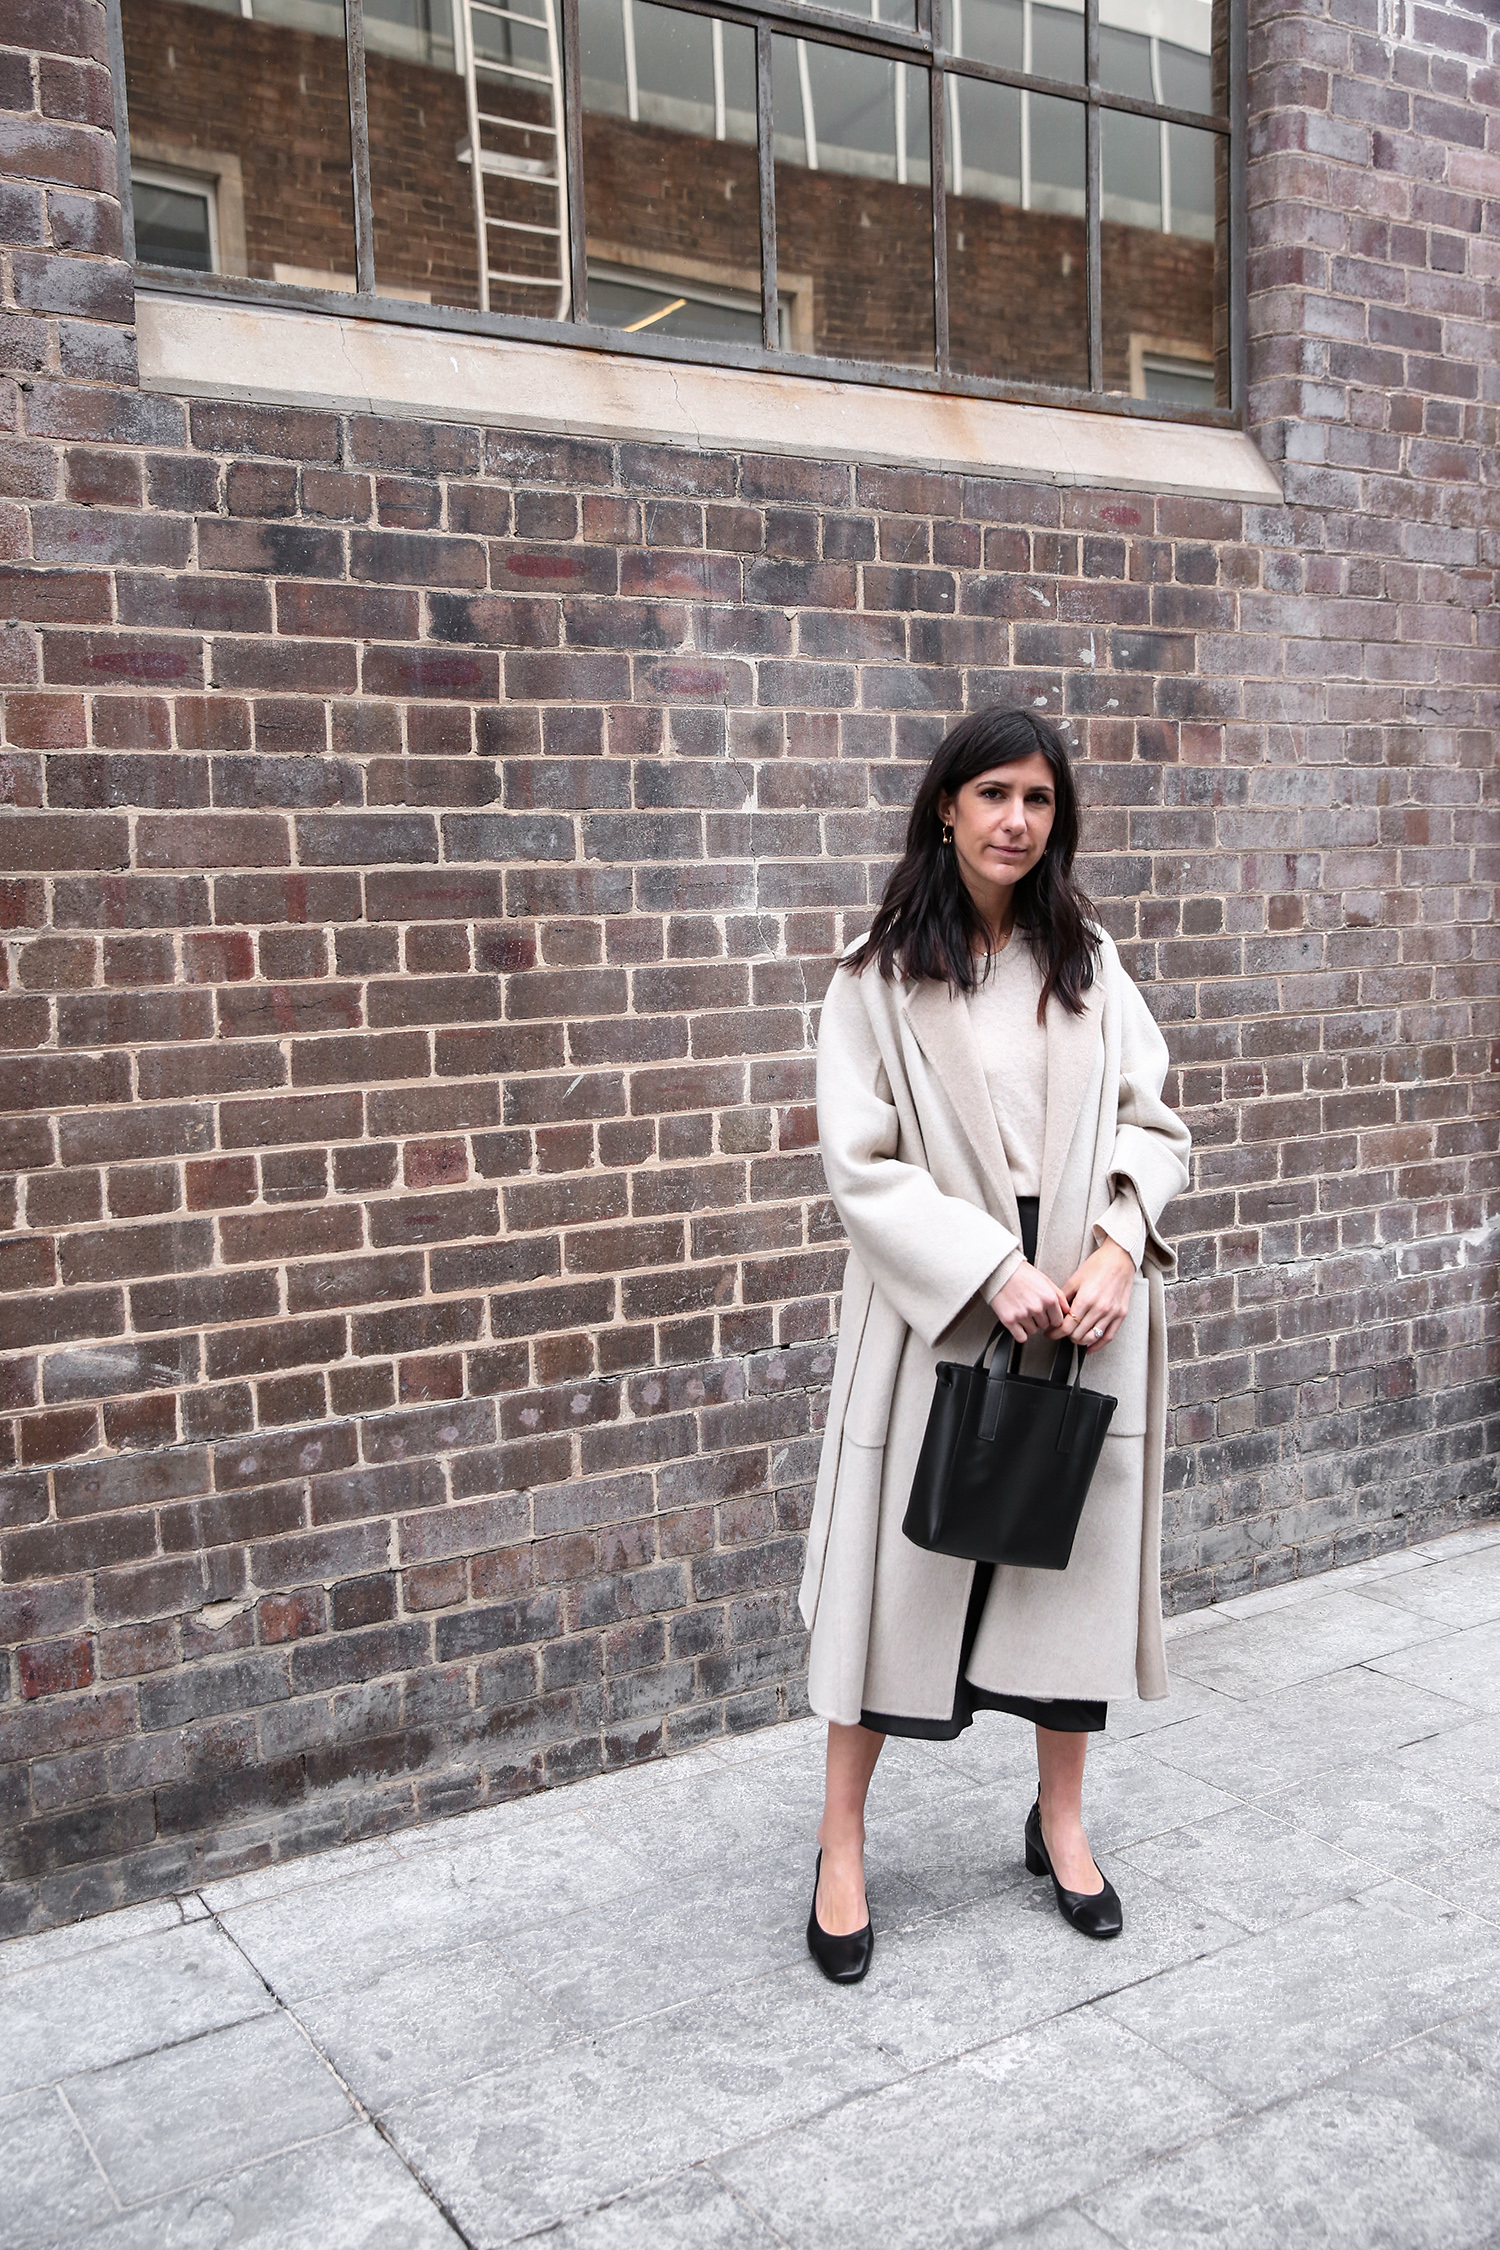 Transitioning your style from your 20s to your 30s